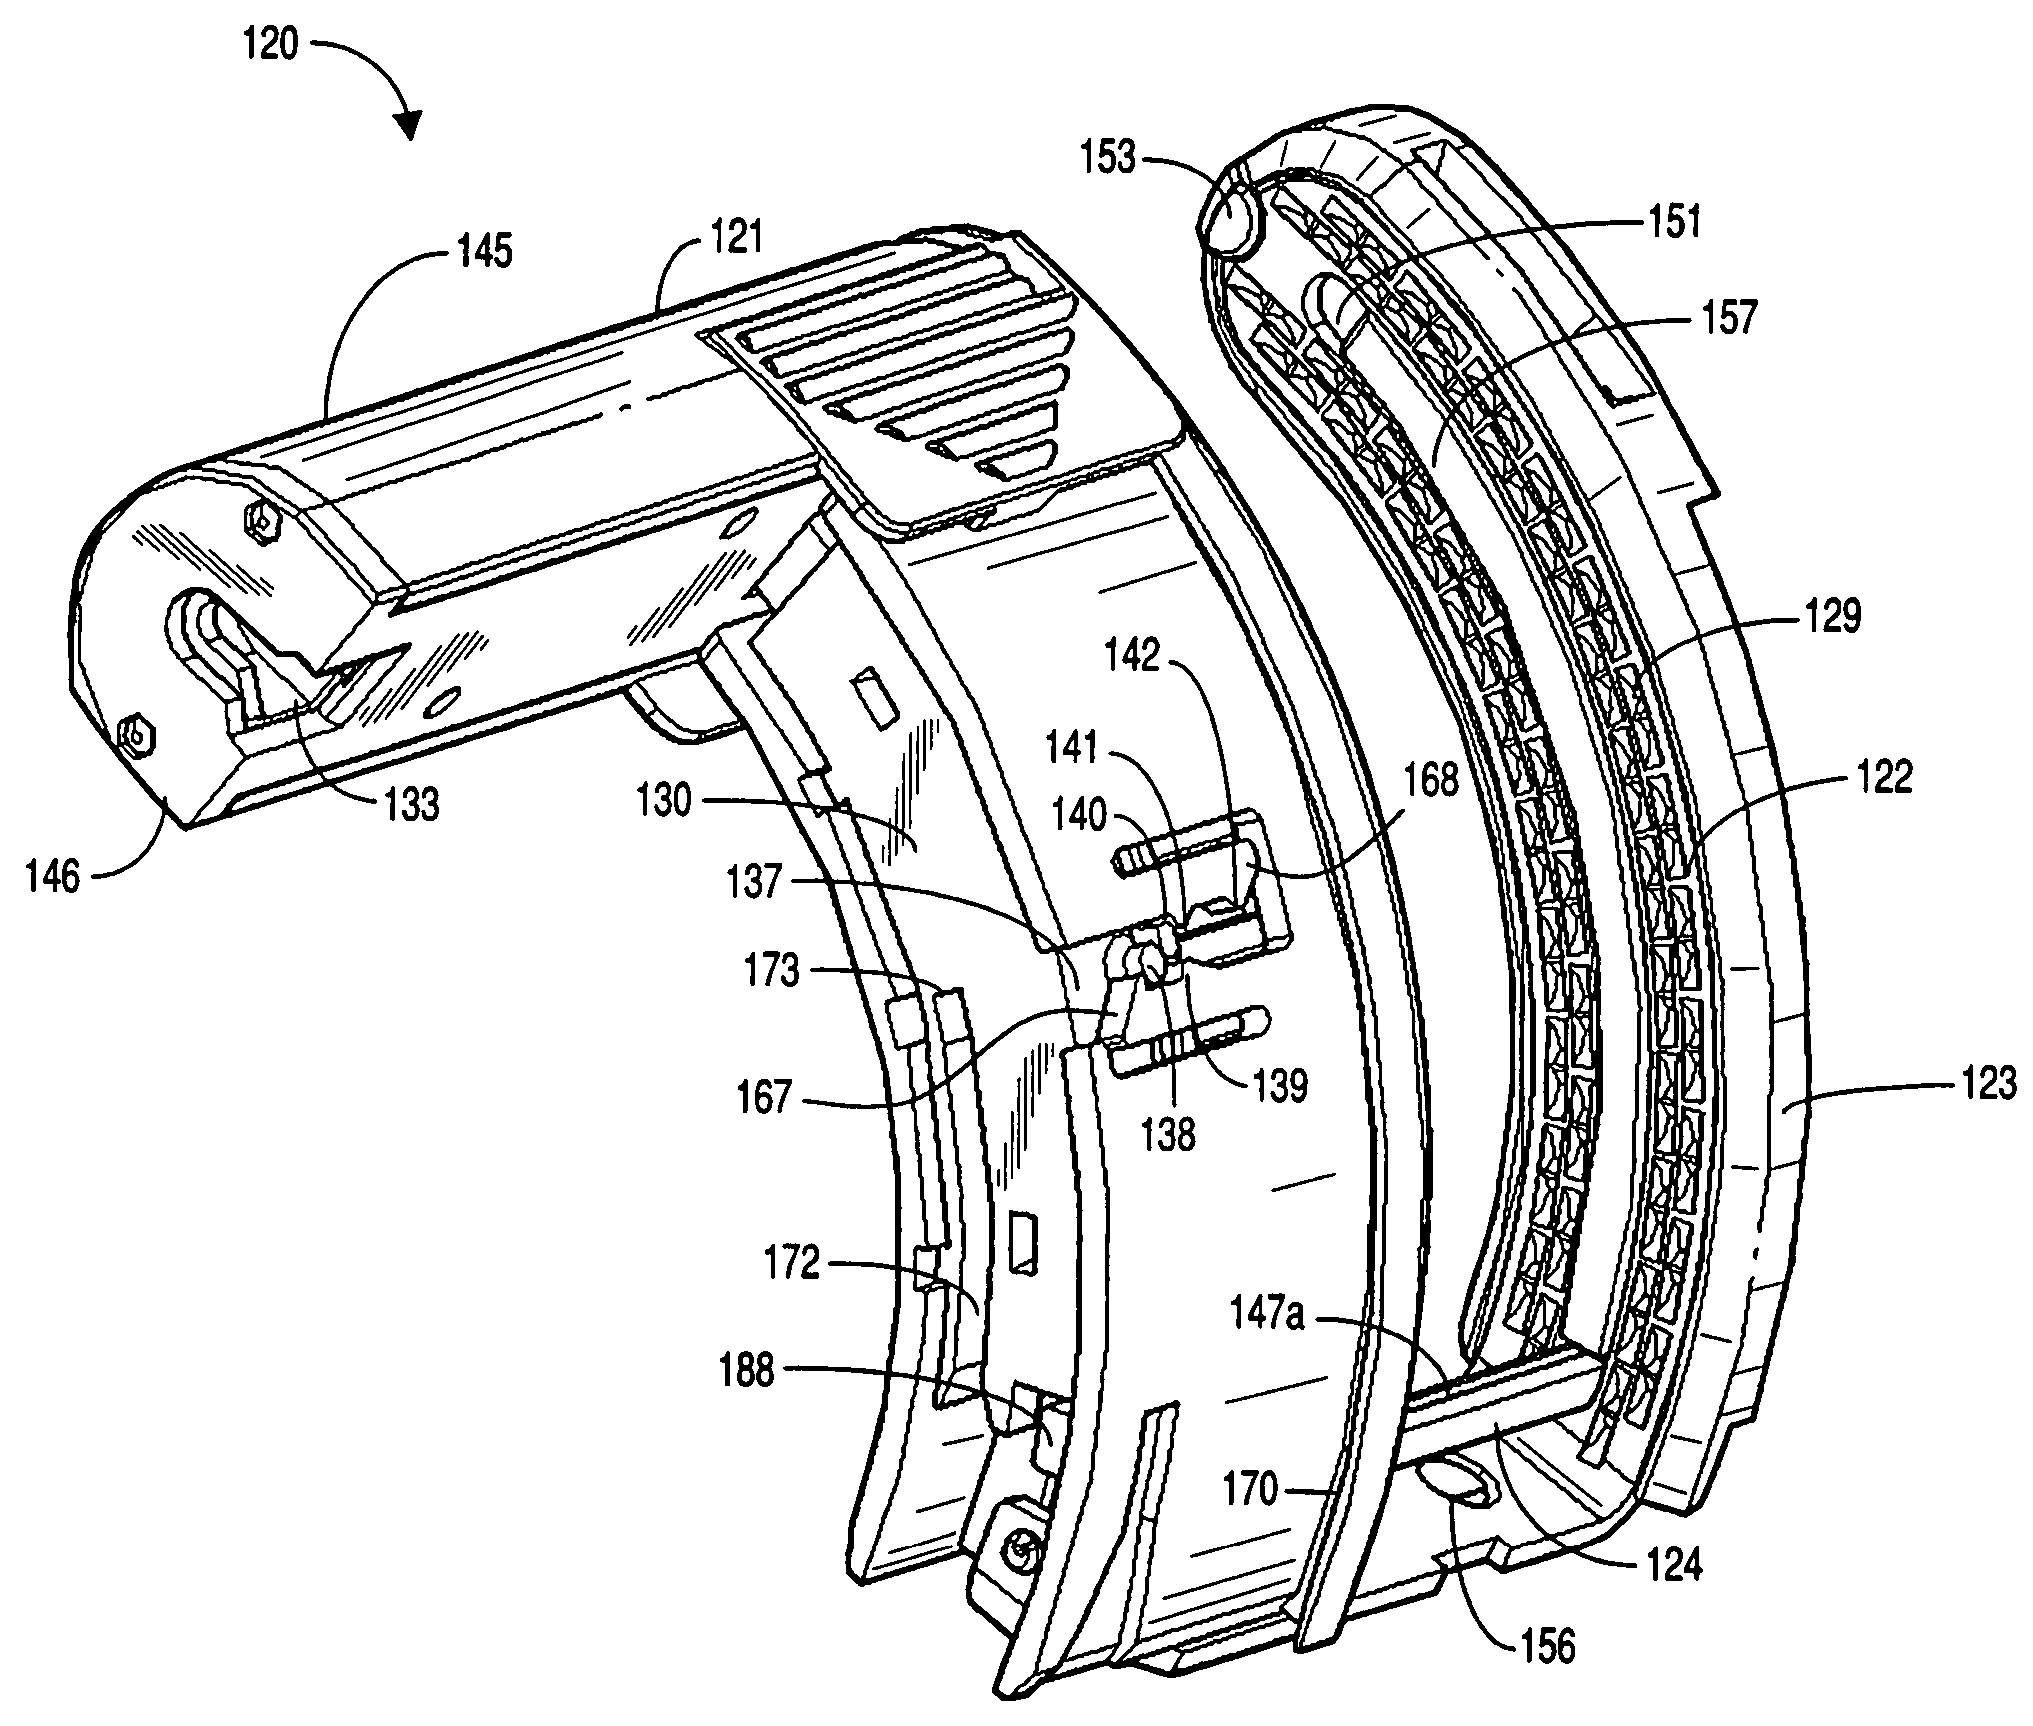 Cartridge with locking knife for a curved cutter stapler